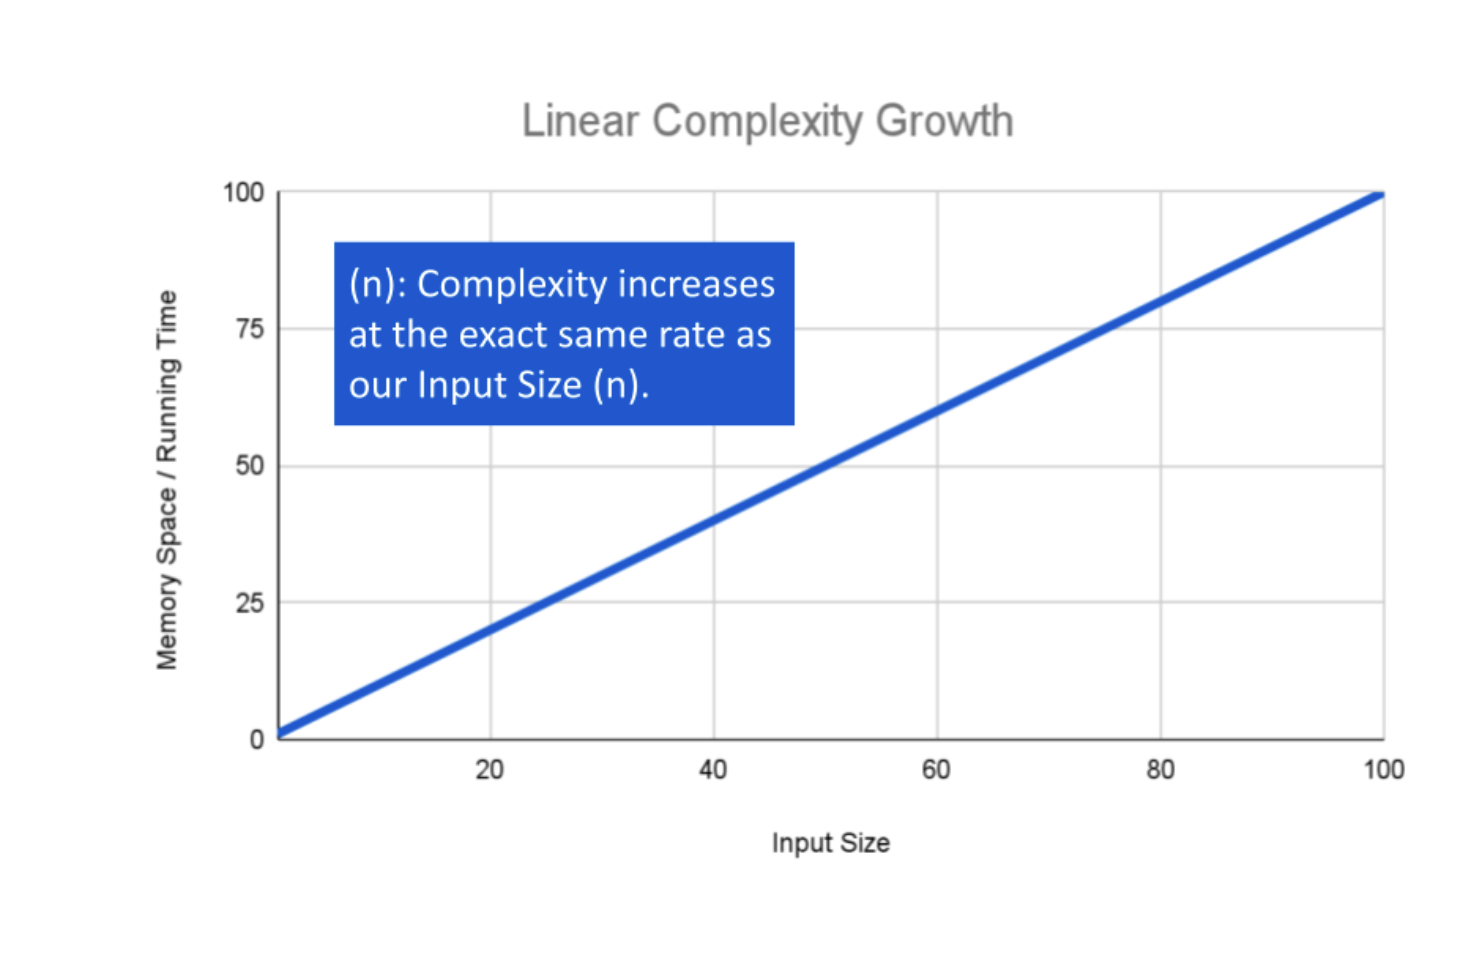 Linear complexity